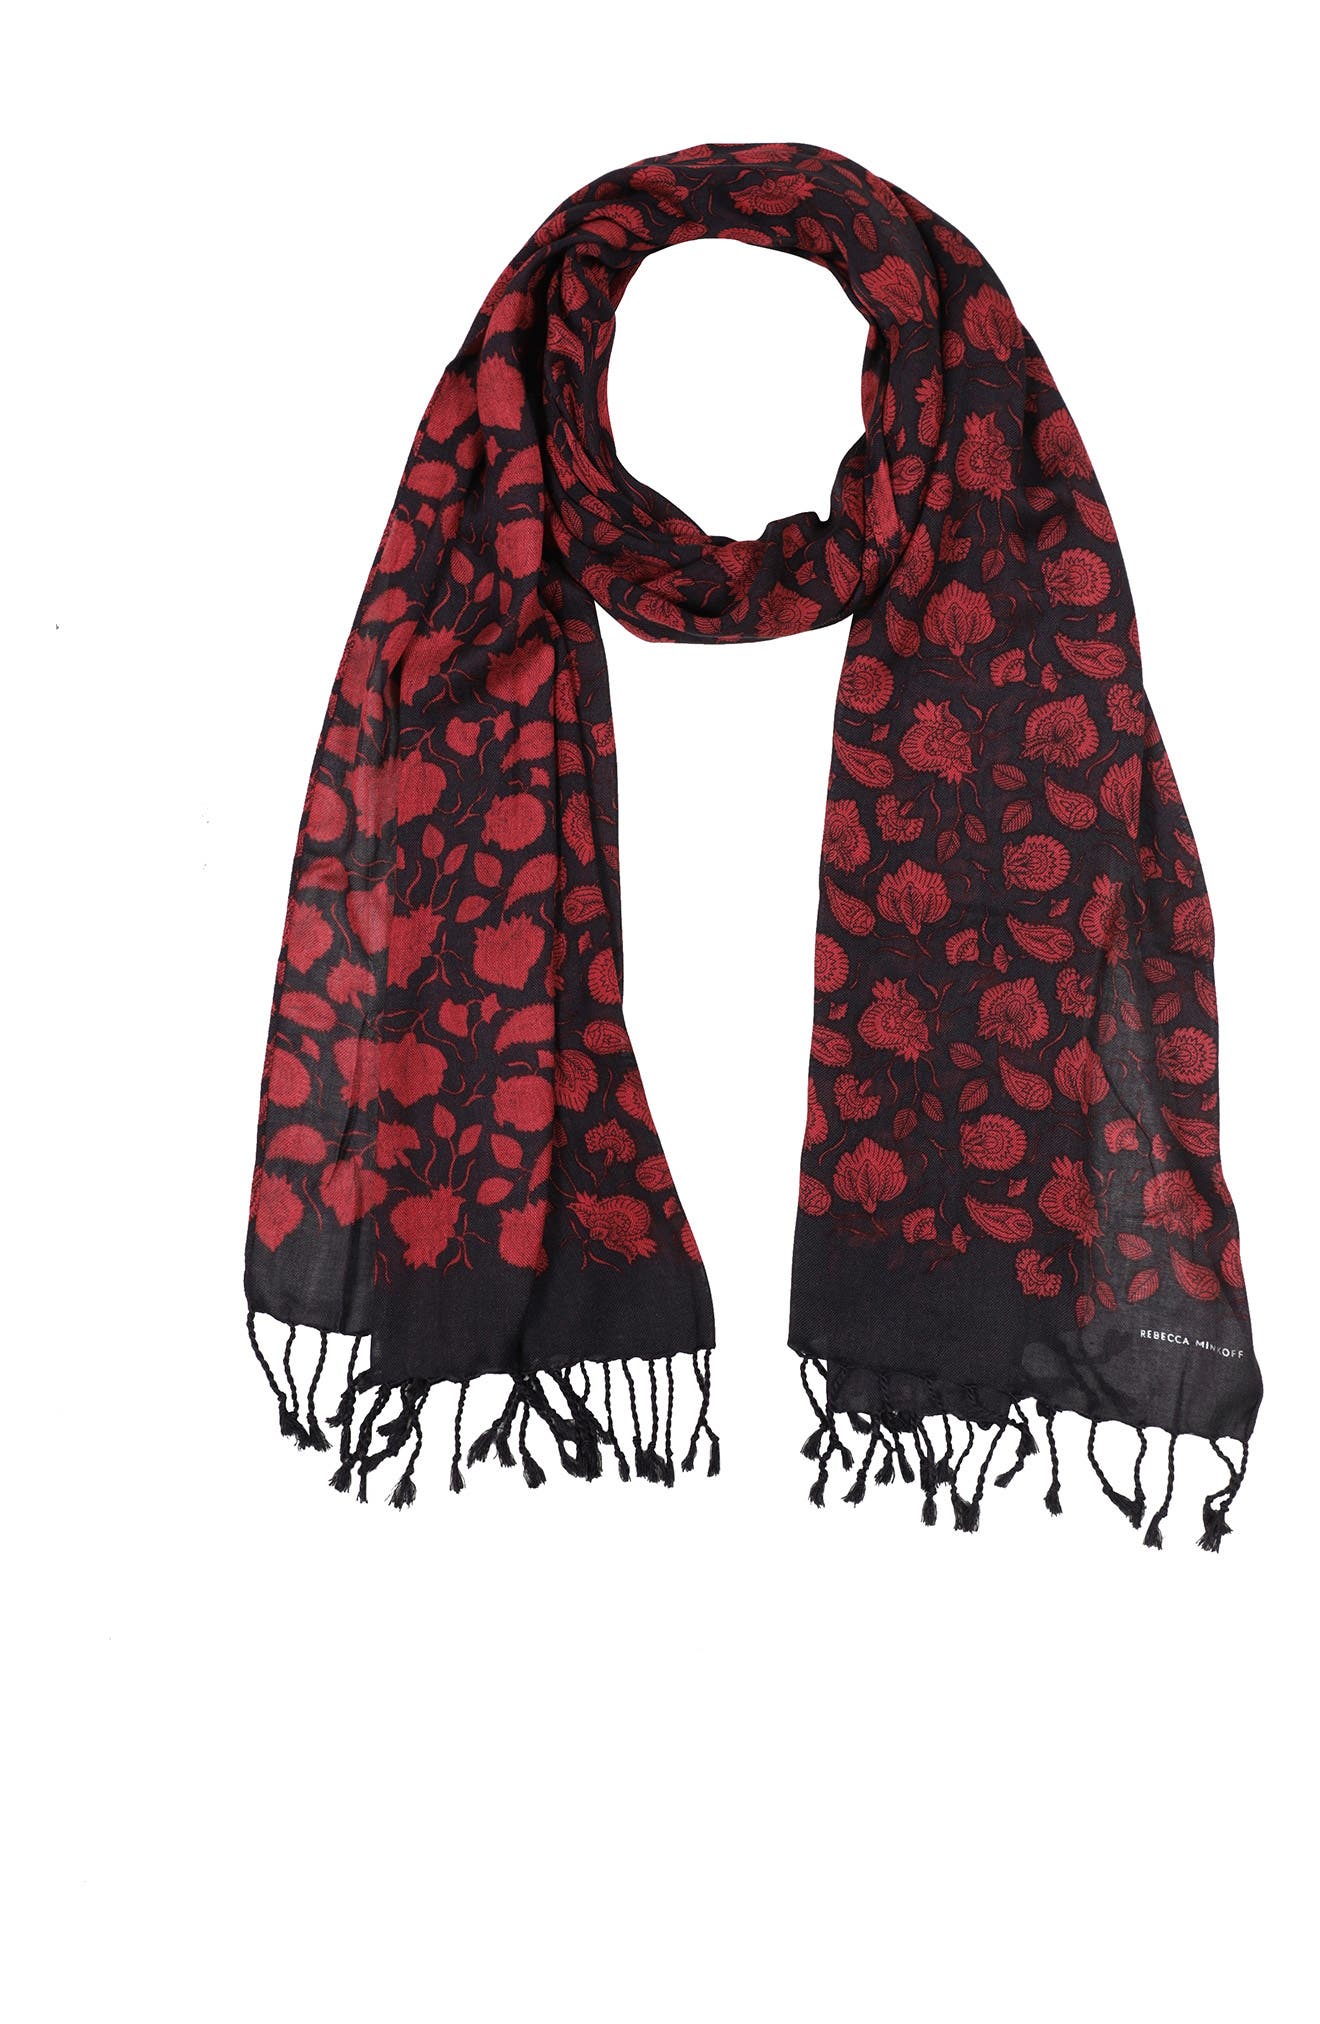 Rebecca Minkoff Lotus Paisley Fringe Scarf in Red Dahlia at Nordstrom